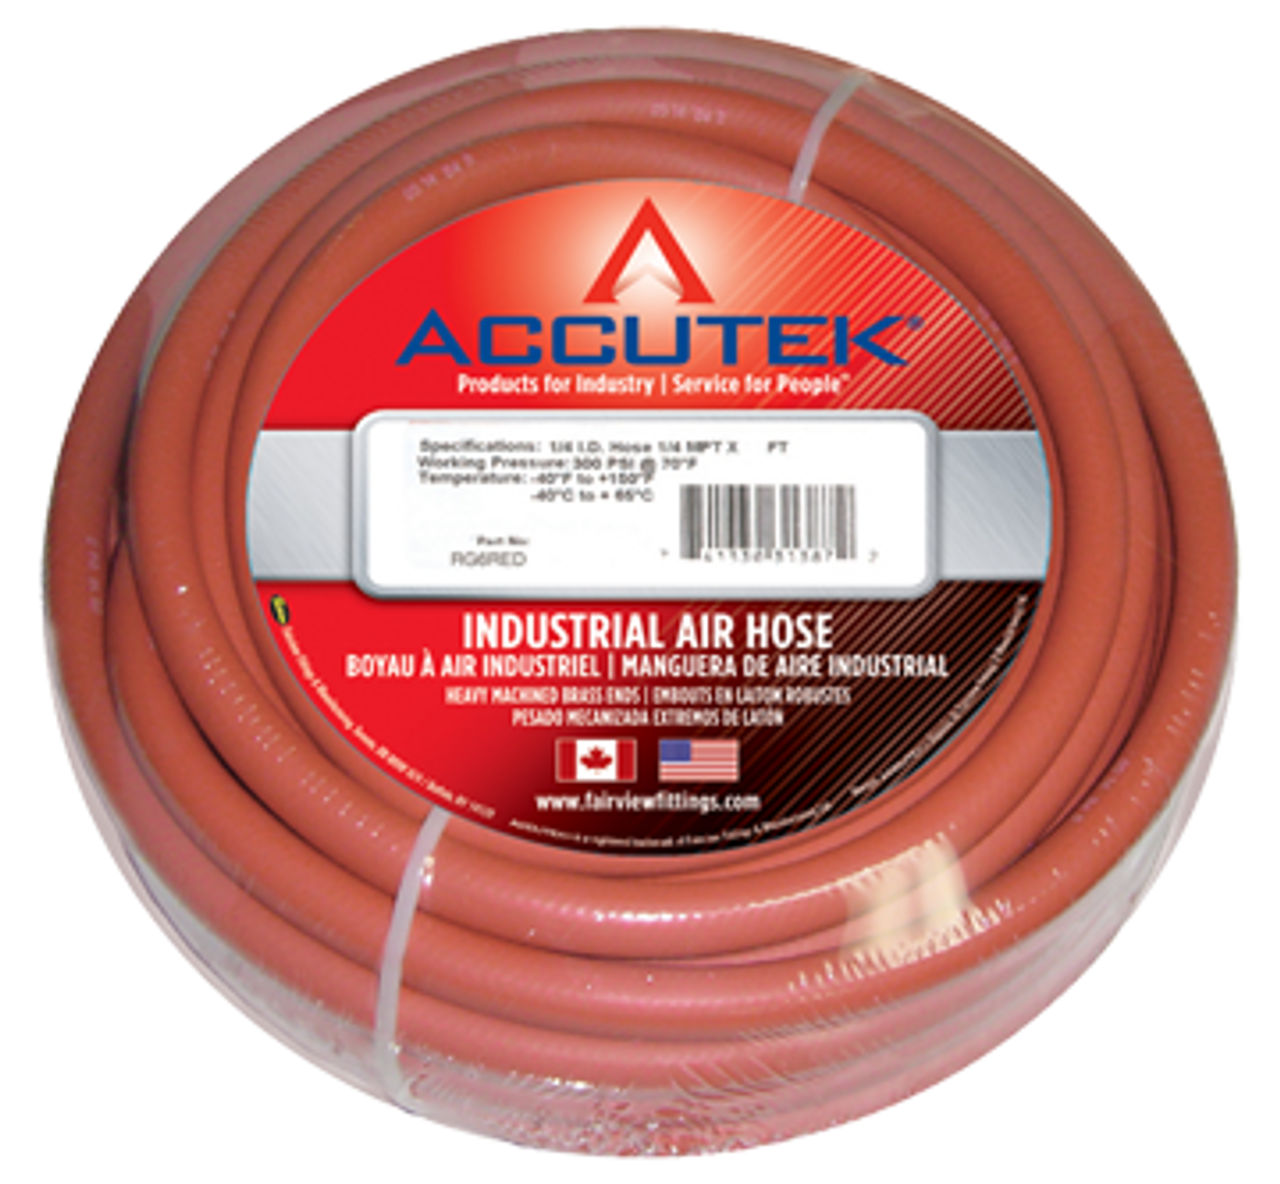 1/4 x 1/4" x 25' Red EPDM 200 PSI Rubber Air Hose Assembly - Brass Male NPT Ends  RG4RED-25B